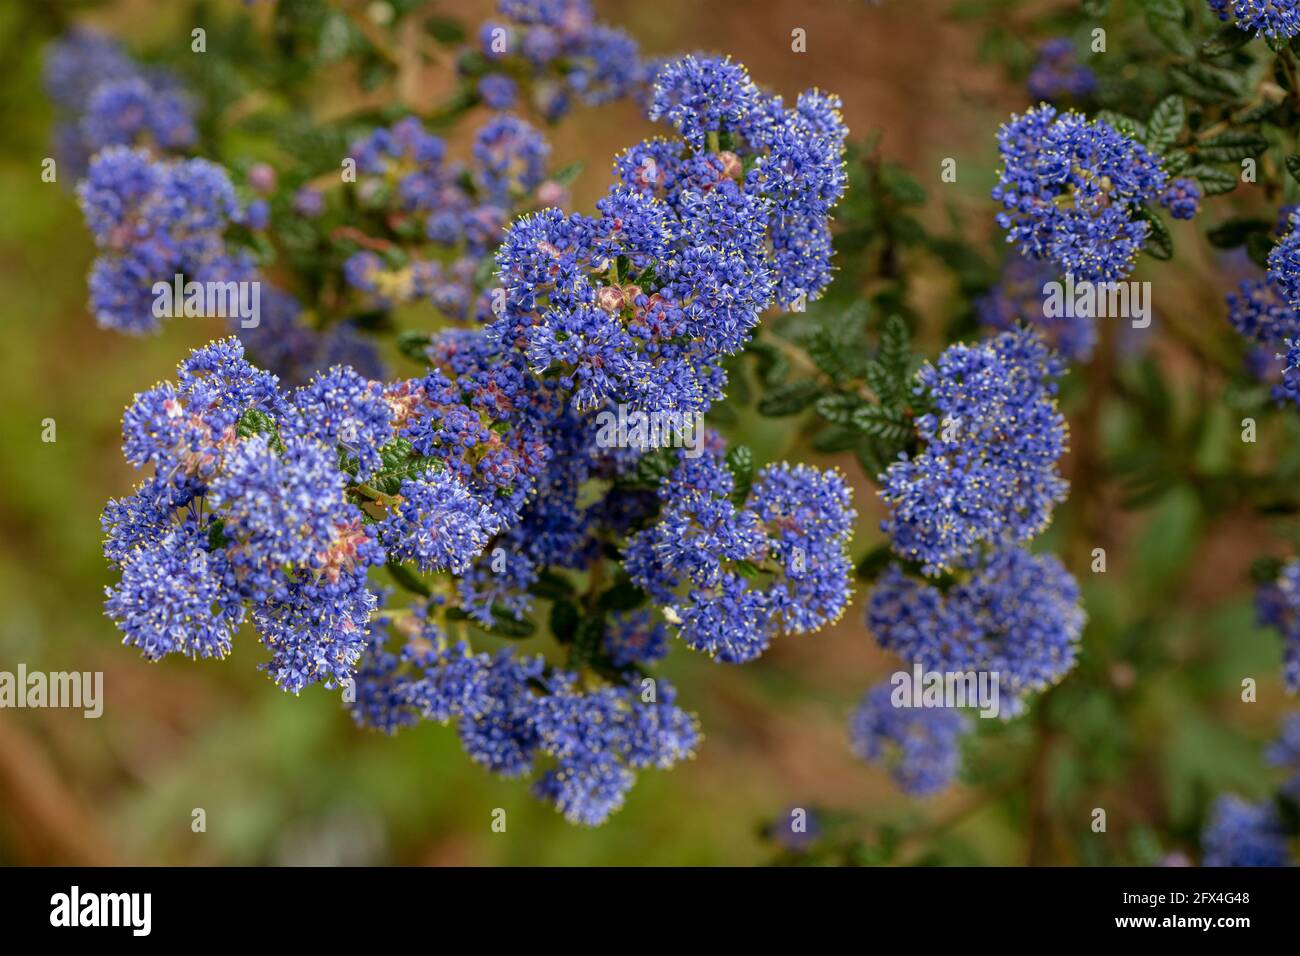 Ceanothus 'Puget Blue', Californian lilac 'Puget Blue', Ceanothus impressus 'Puget Blue' flowering profusely in late spring Stock Photo